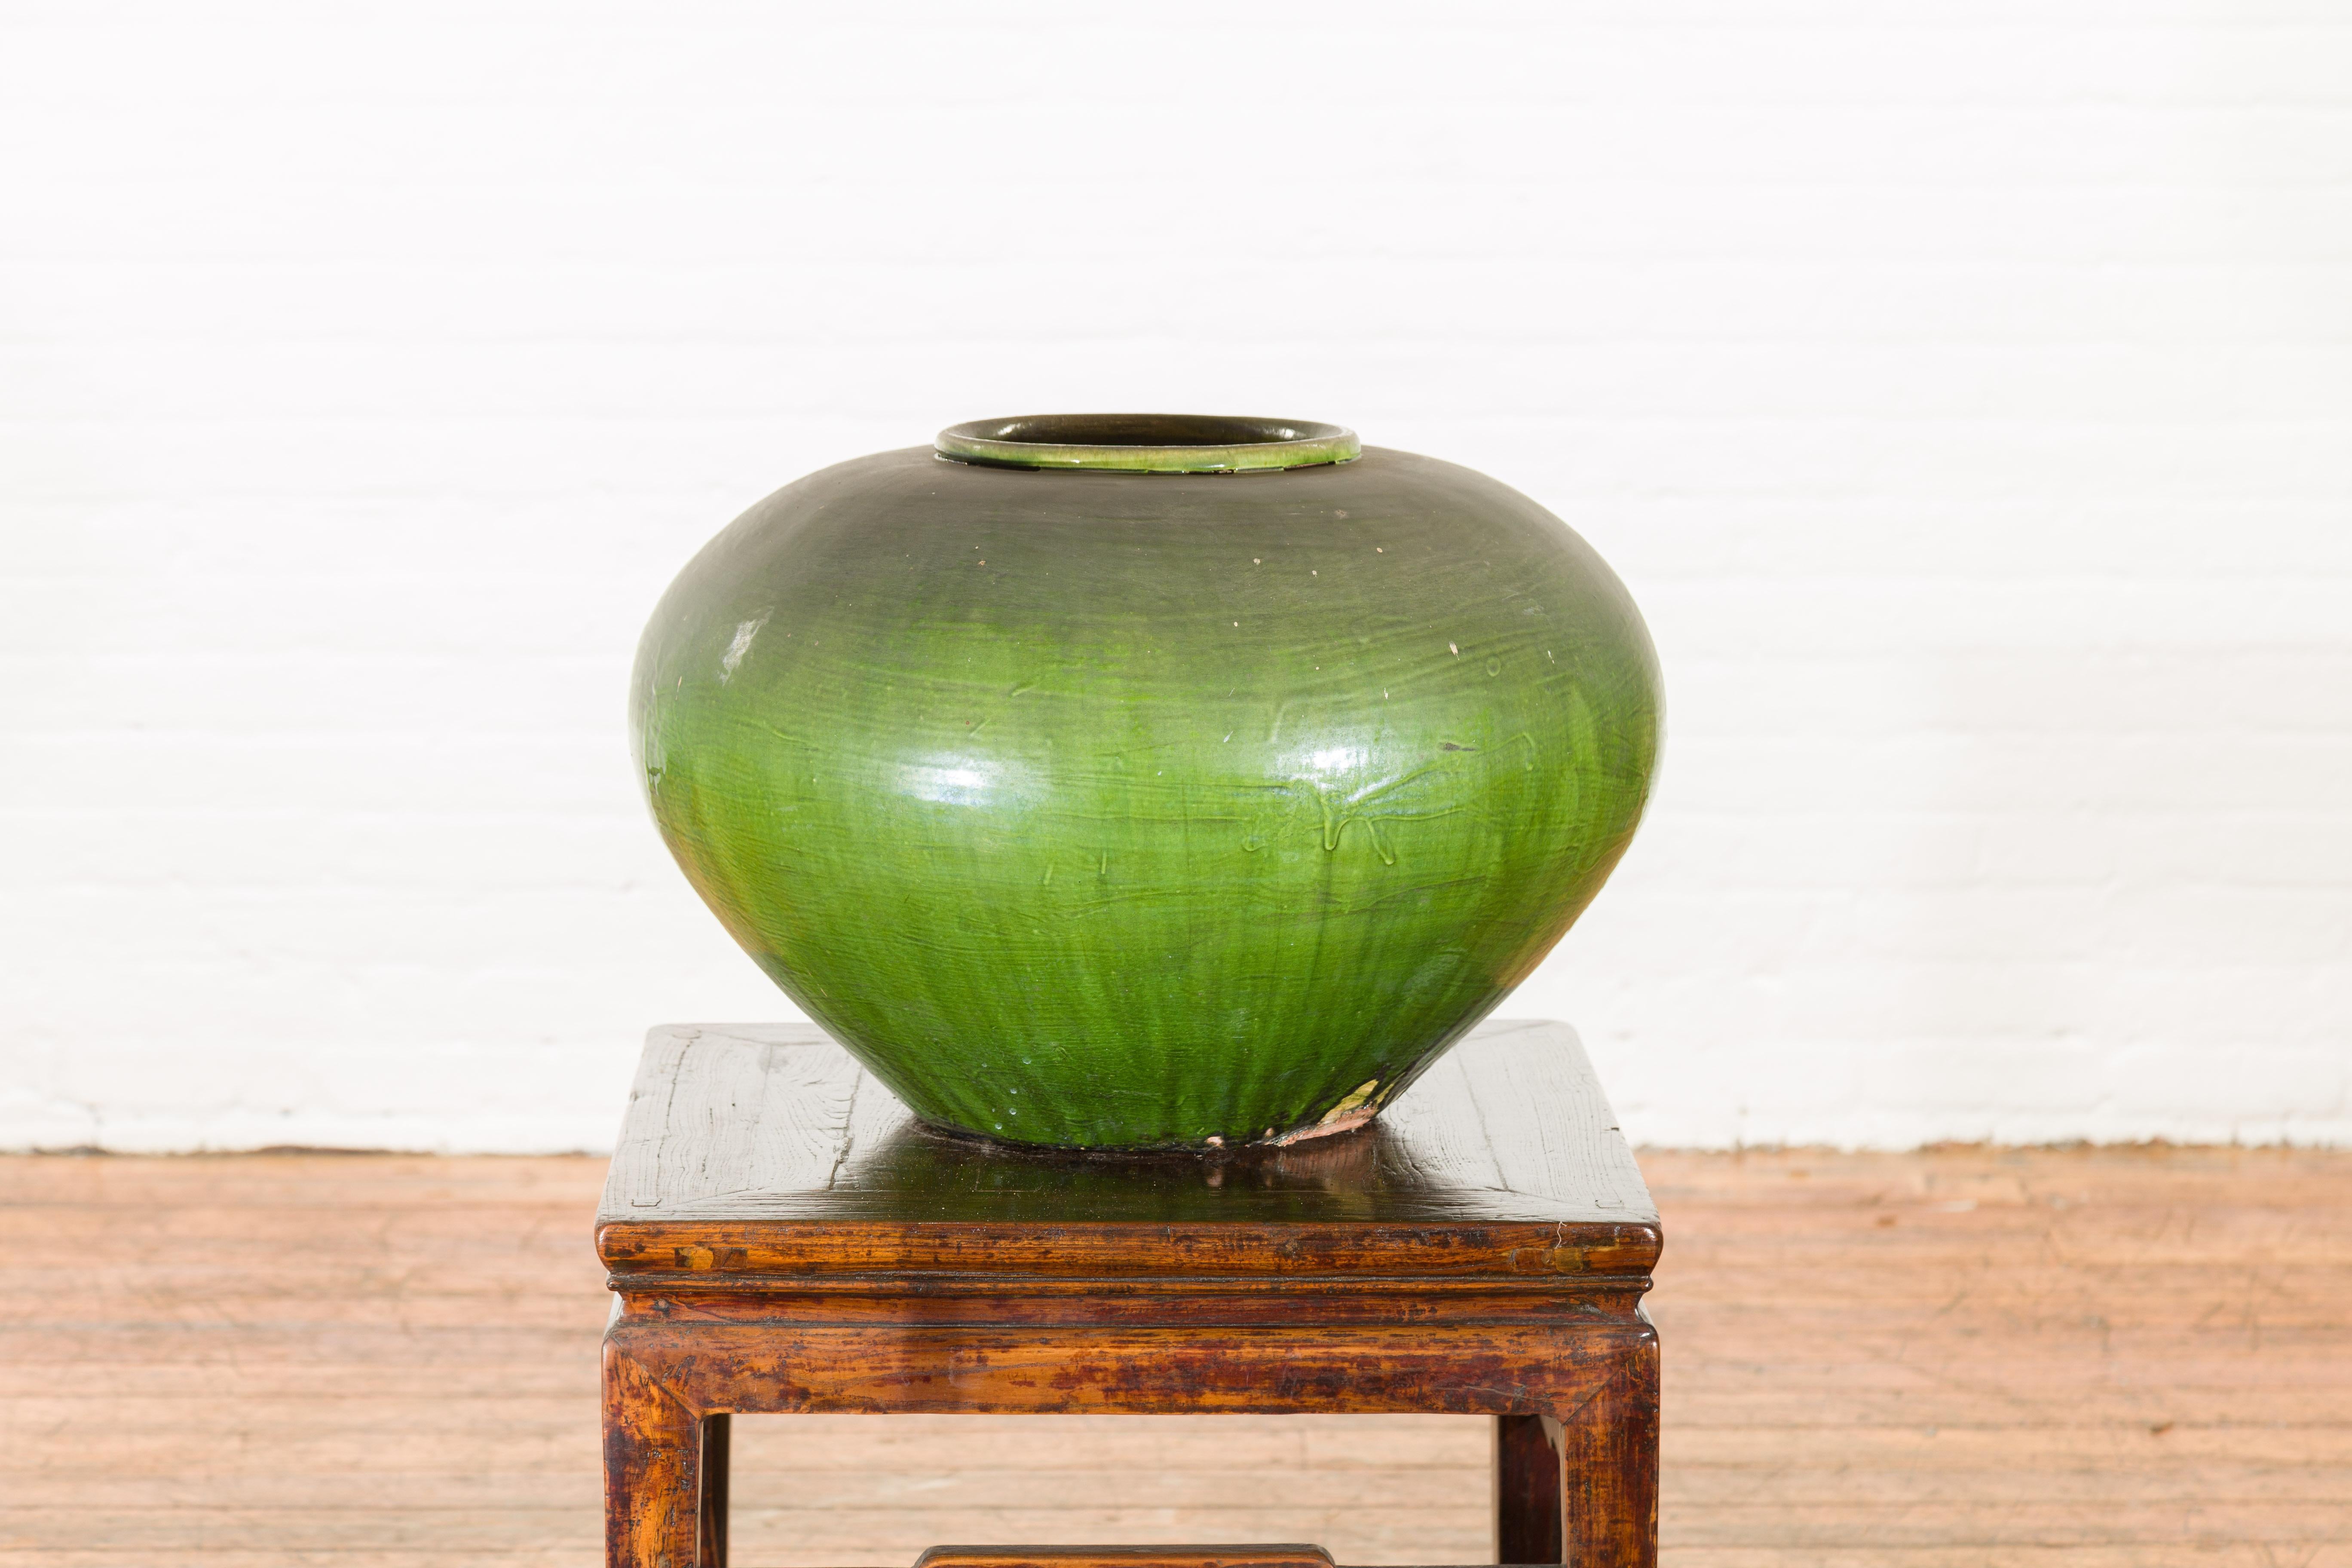 A Chinese vintage porcelain low squat planter from the mid 20th century, with verde glaze. Created in China during the midcentury period, this low squat planter charms us with its generous body and verde glaze. Showcasing a 7.25